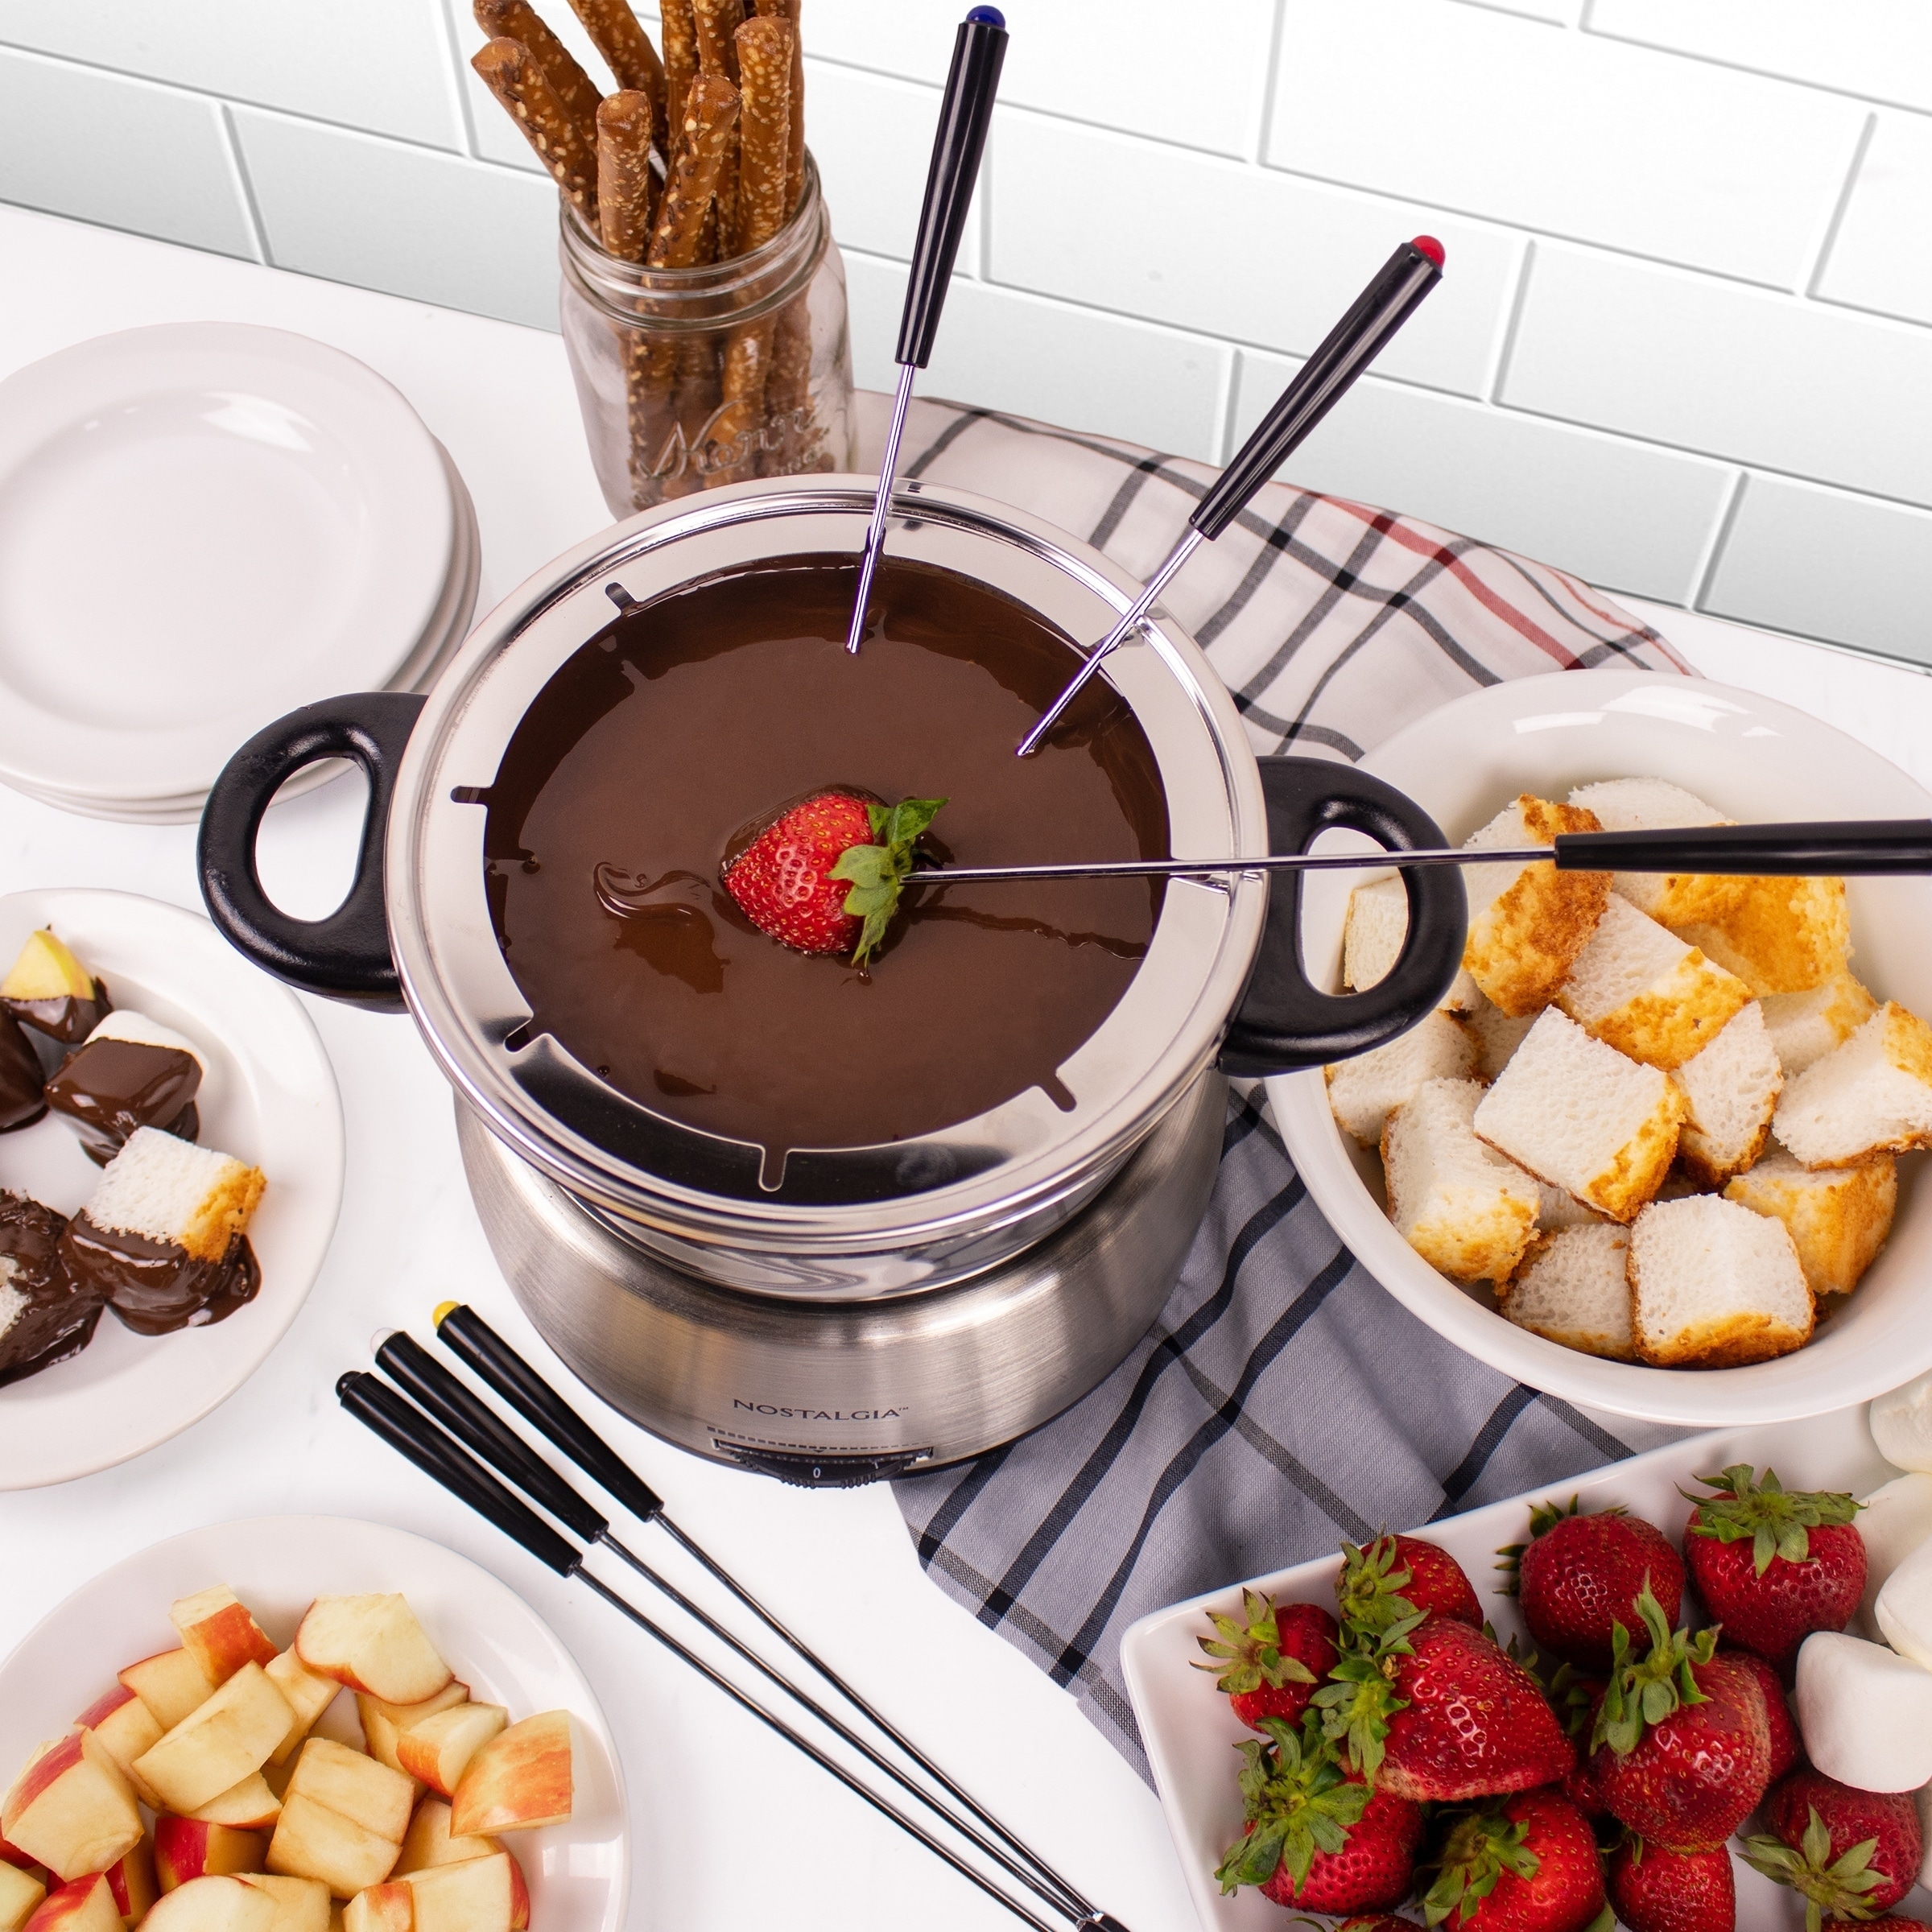 https://ak1.ostkcdn.com/images/products/6277393/Nostalgia-FPS200-6-Cup-Stainless-Steel-Electric-Fondue-Pot-dcb95c7c-8a7e-417a-af68-2e90220c455a.jpg